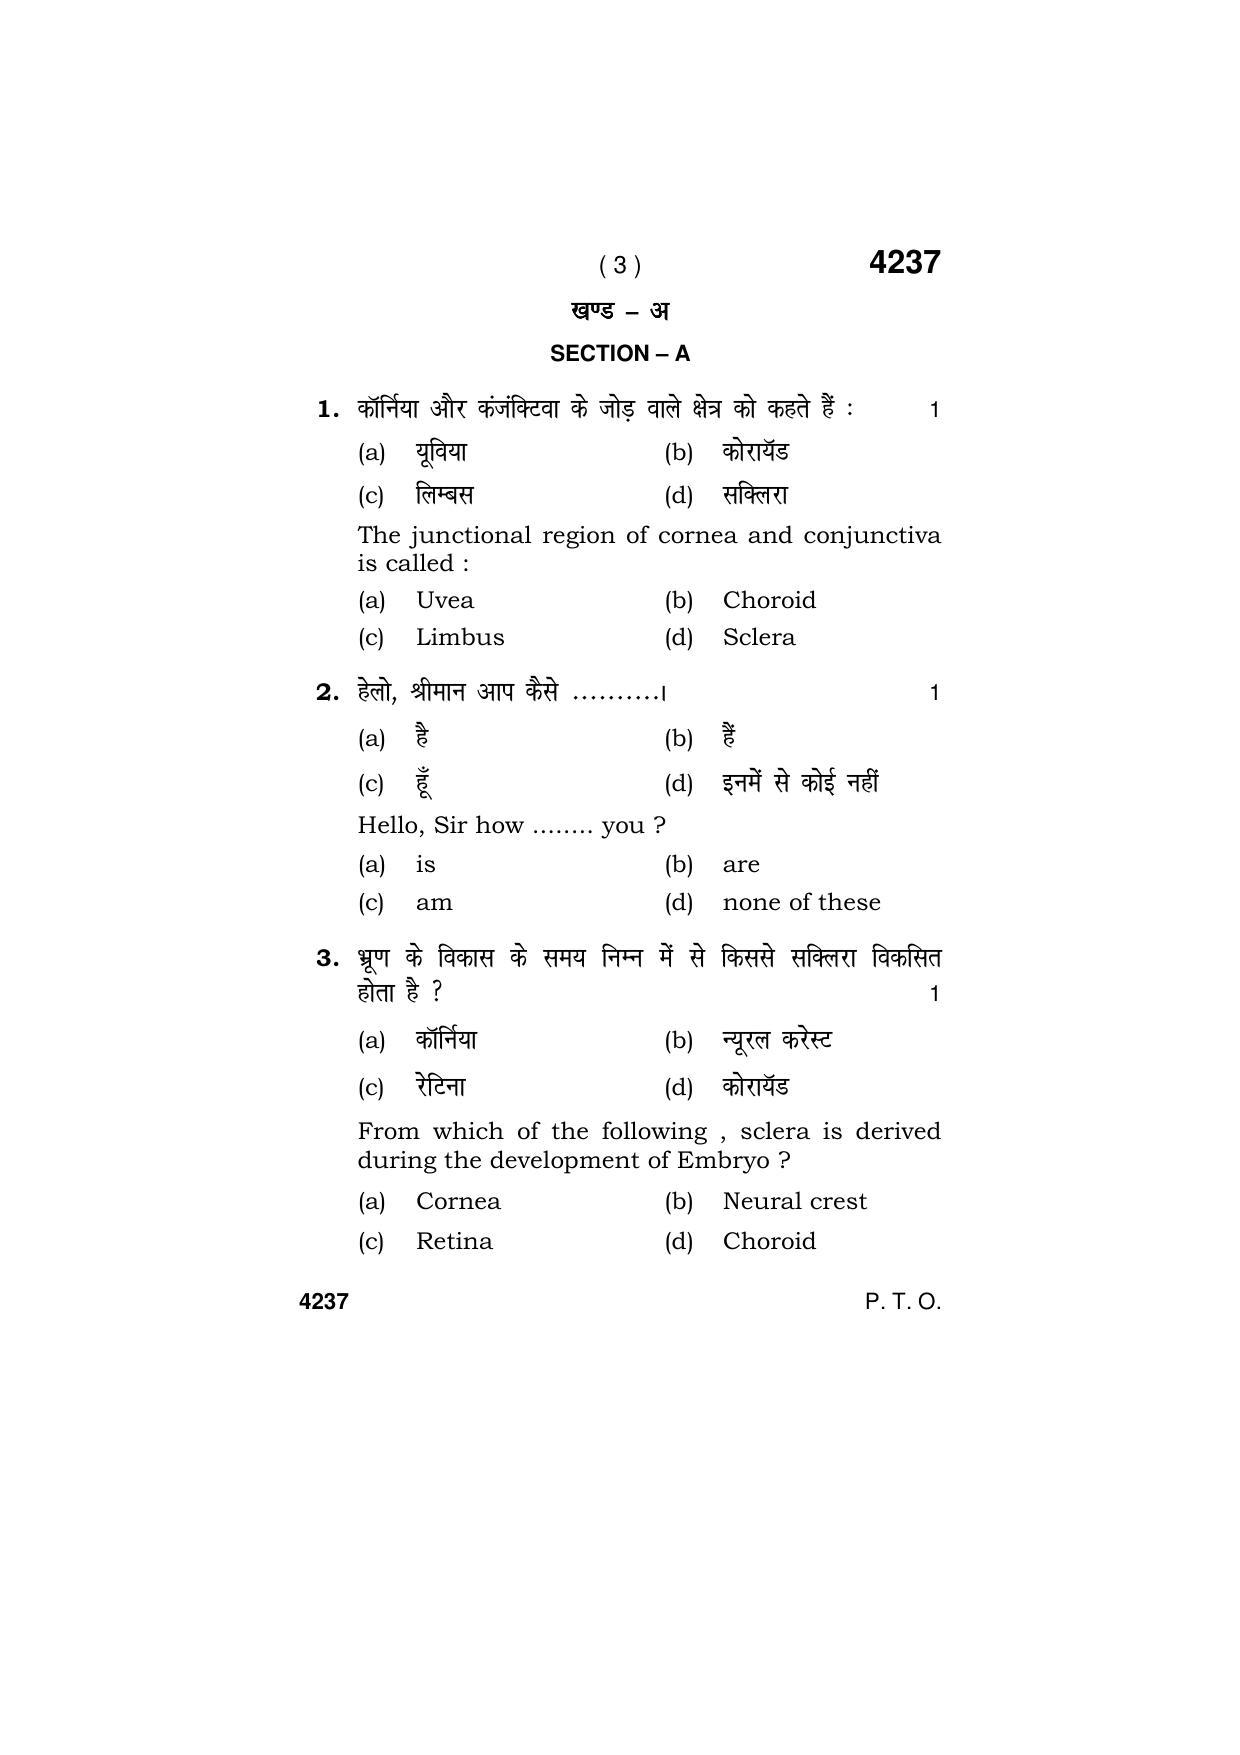 Haryana Board HBSE Class 10 Vision Technician 2019 Question Paper - Page 3